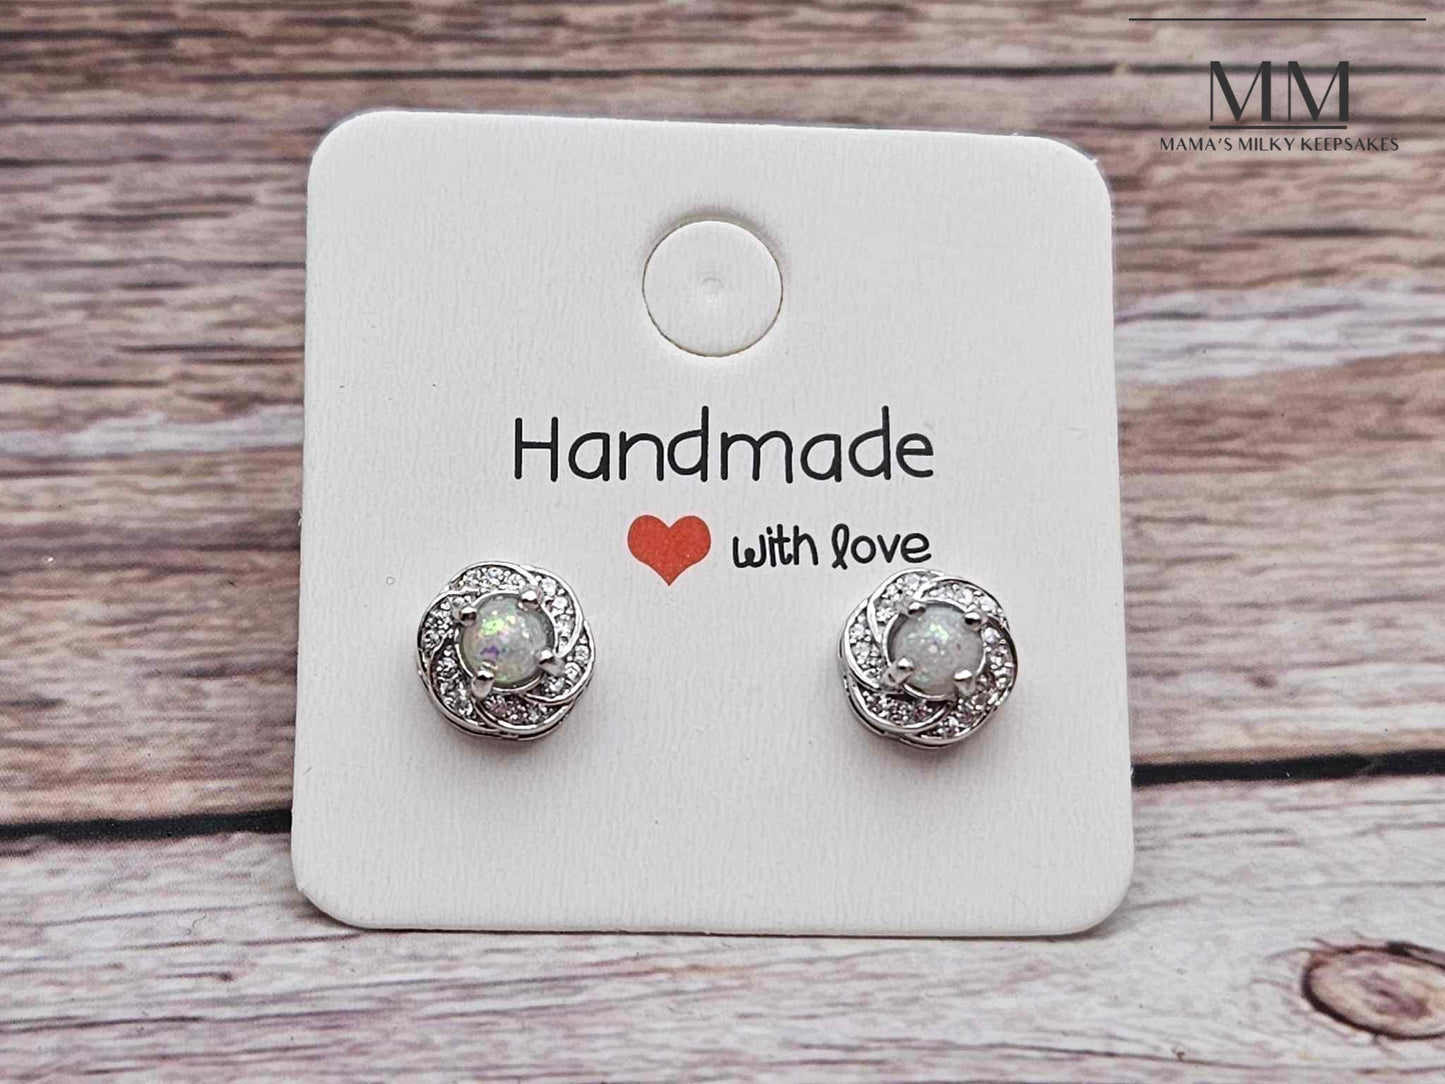 Breastmilk Round Earrings, Cremation Round Earrings, Keepsake Round Earrings, Sterling Silver Round Earrings, Hair Round Earrings, Ash Round Earrings, Umbilical Cord Round Earrings, BreastmilkJewelry Round Earrings